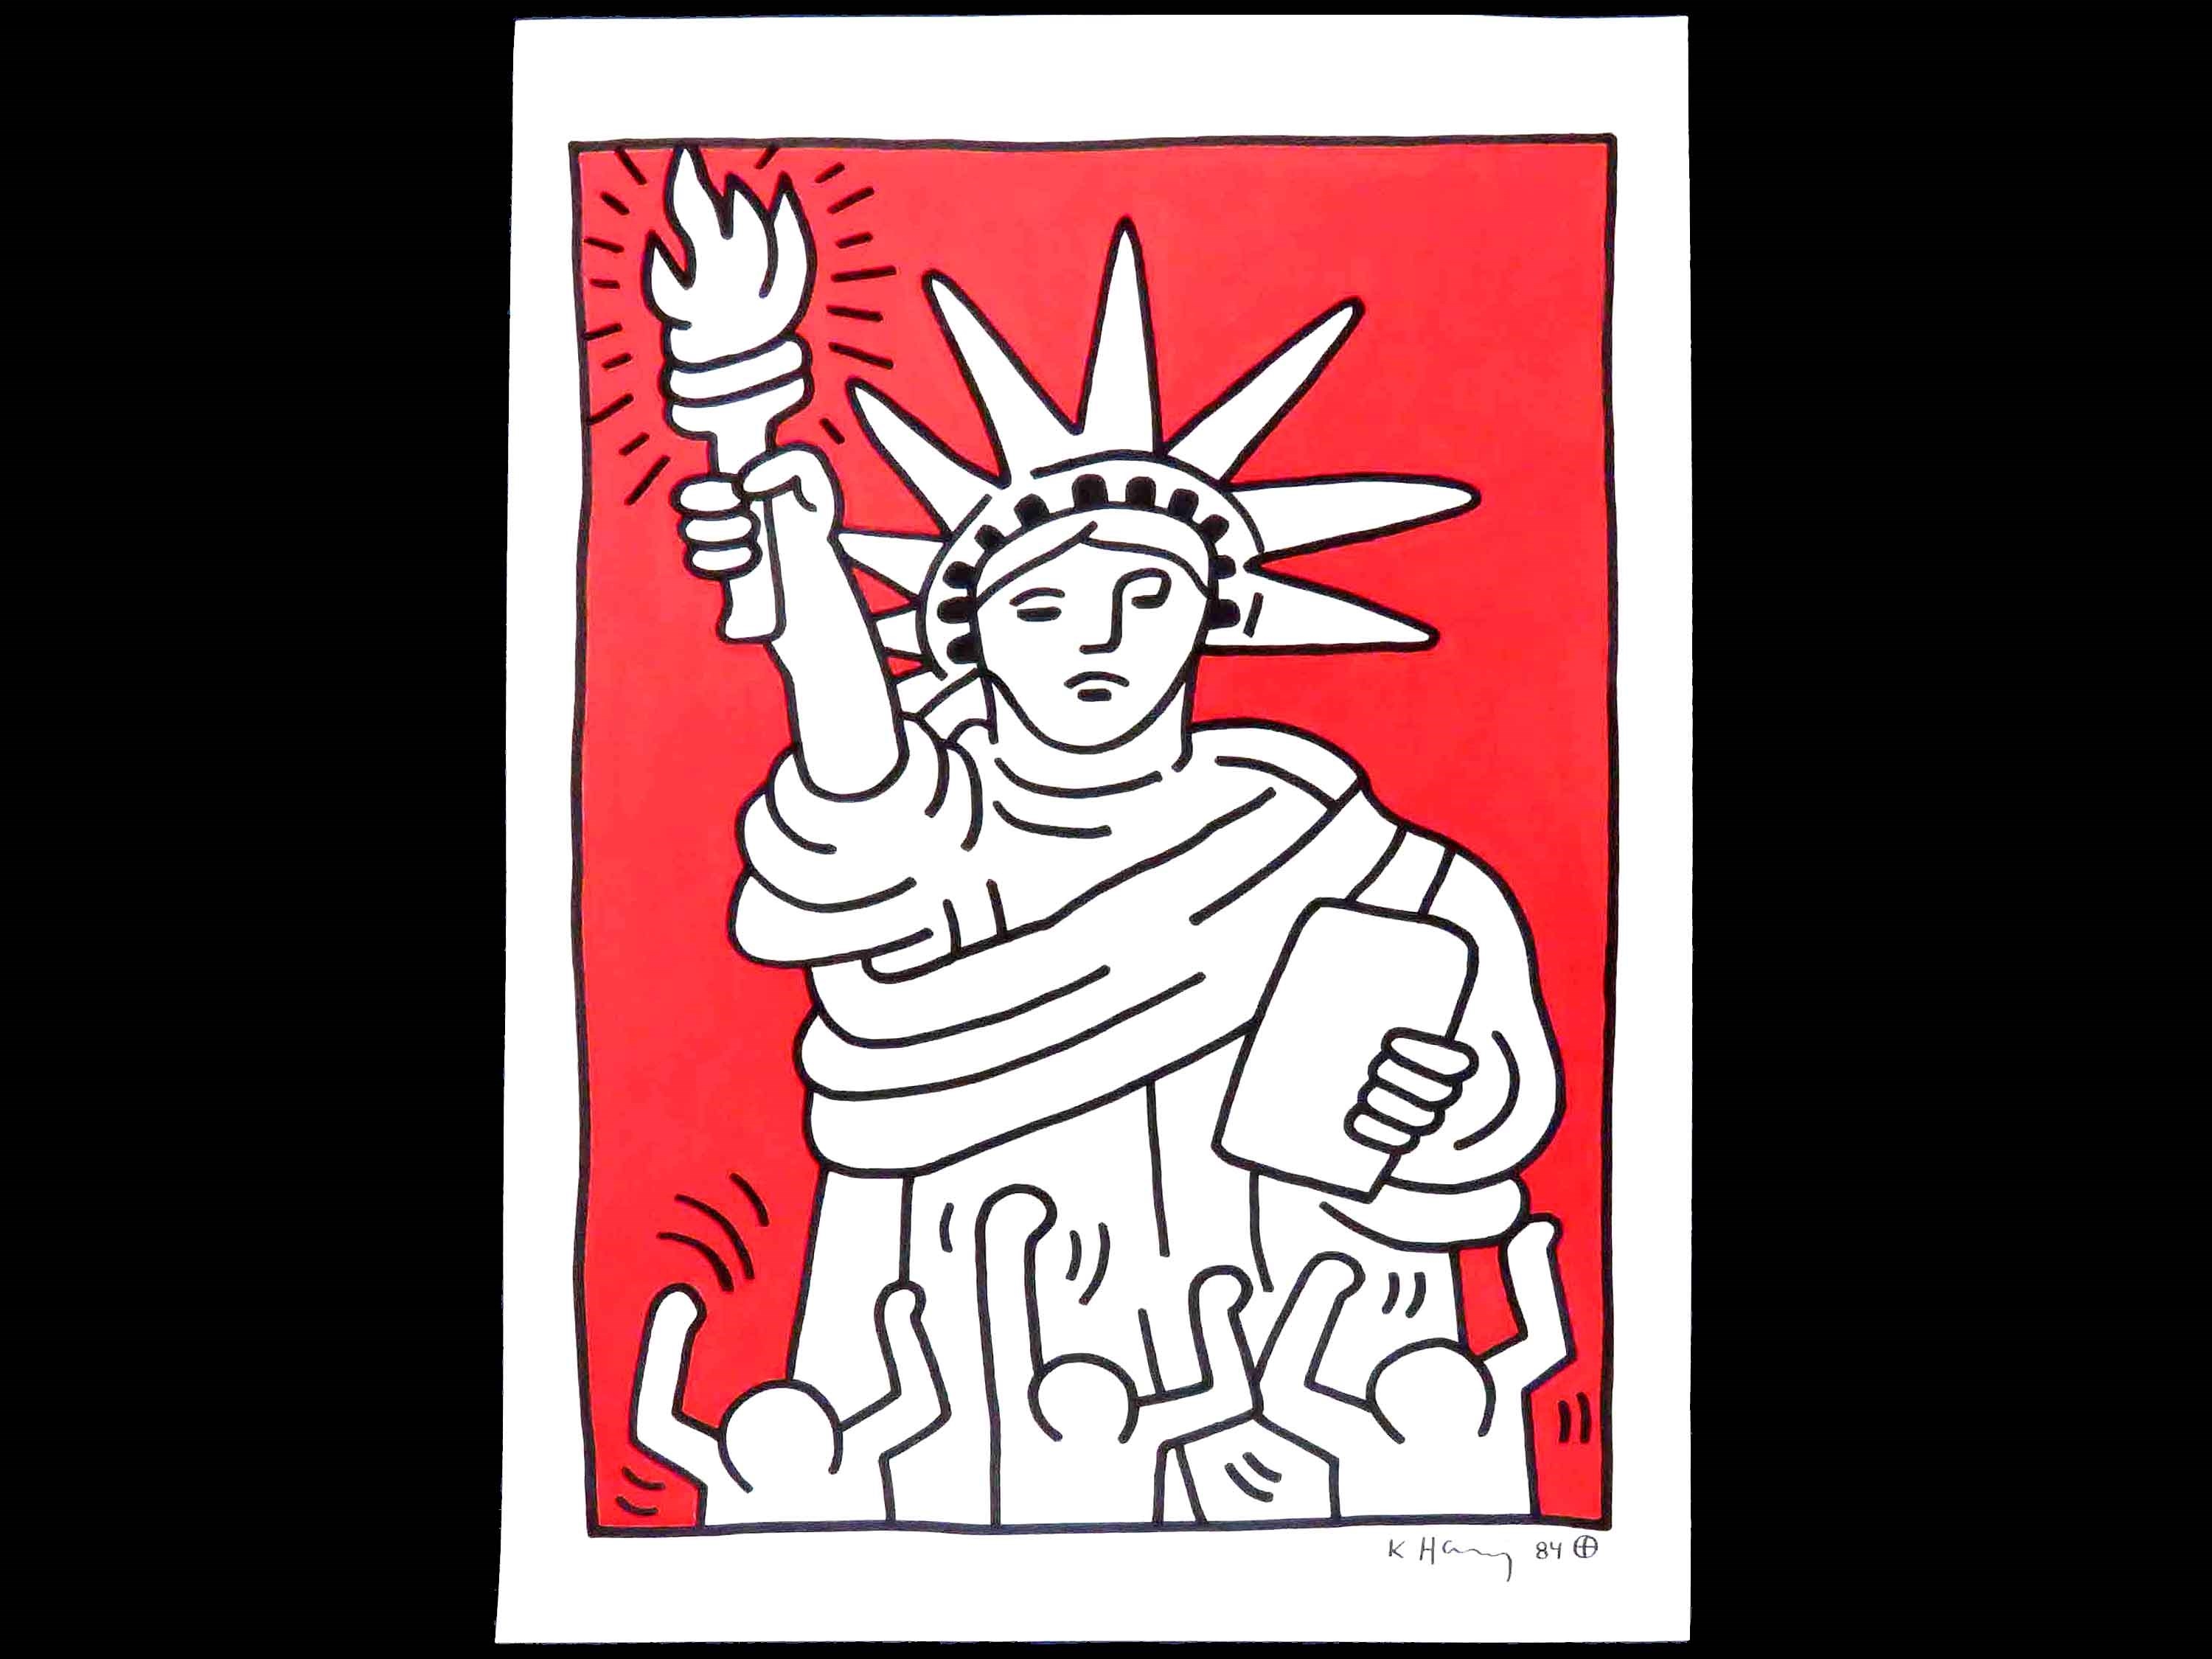 STATUE OF LIBERTY by Keith Haring, 1984